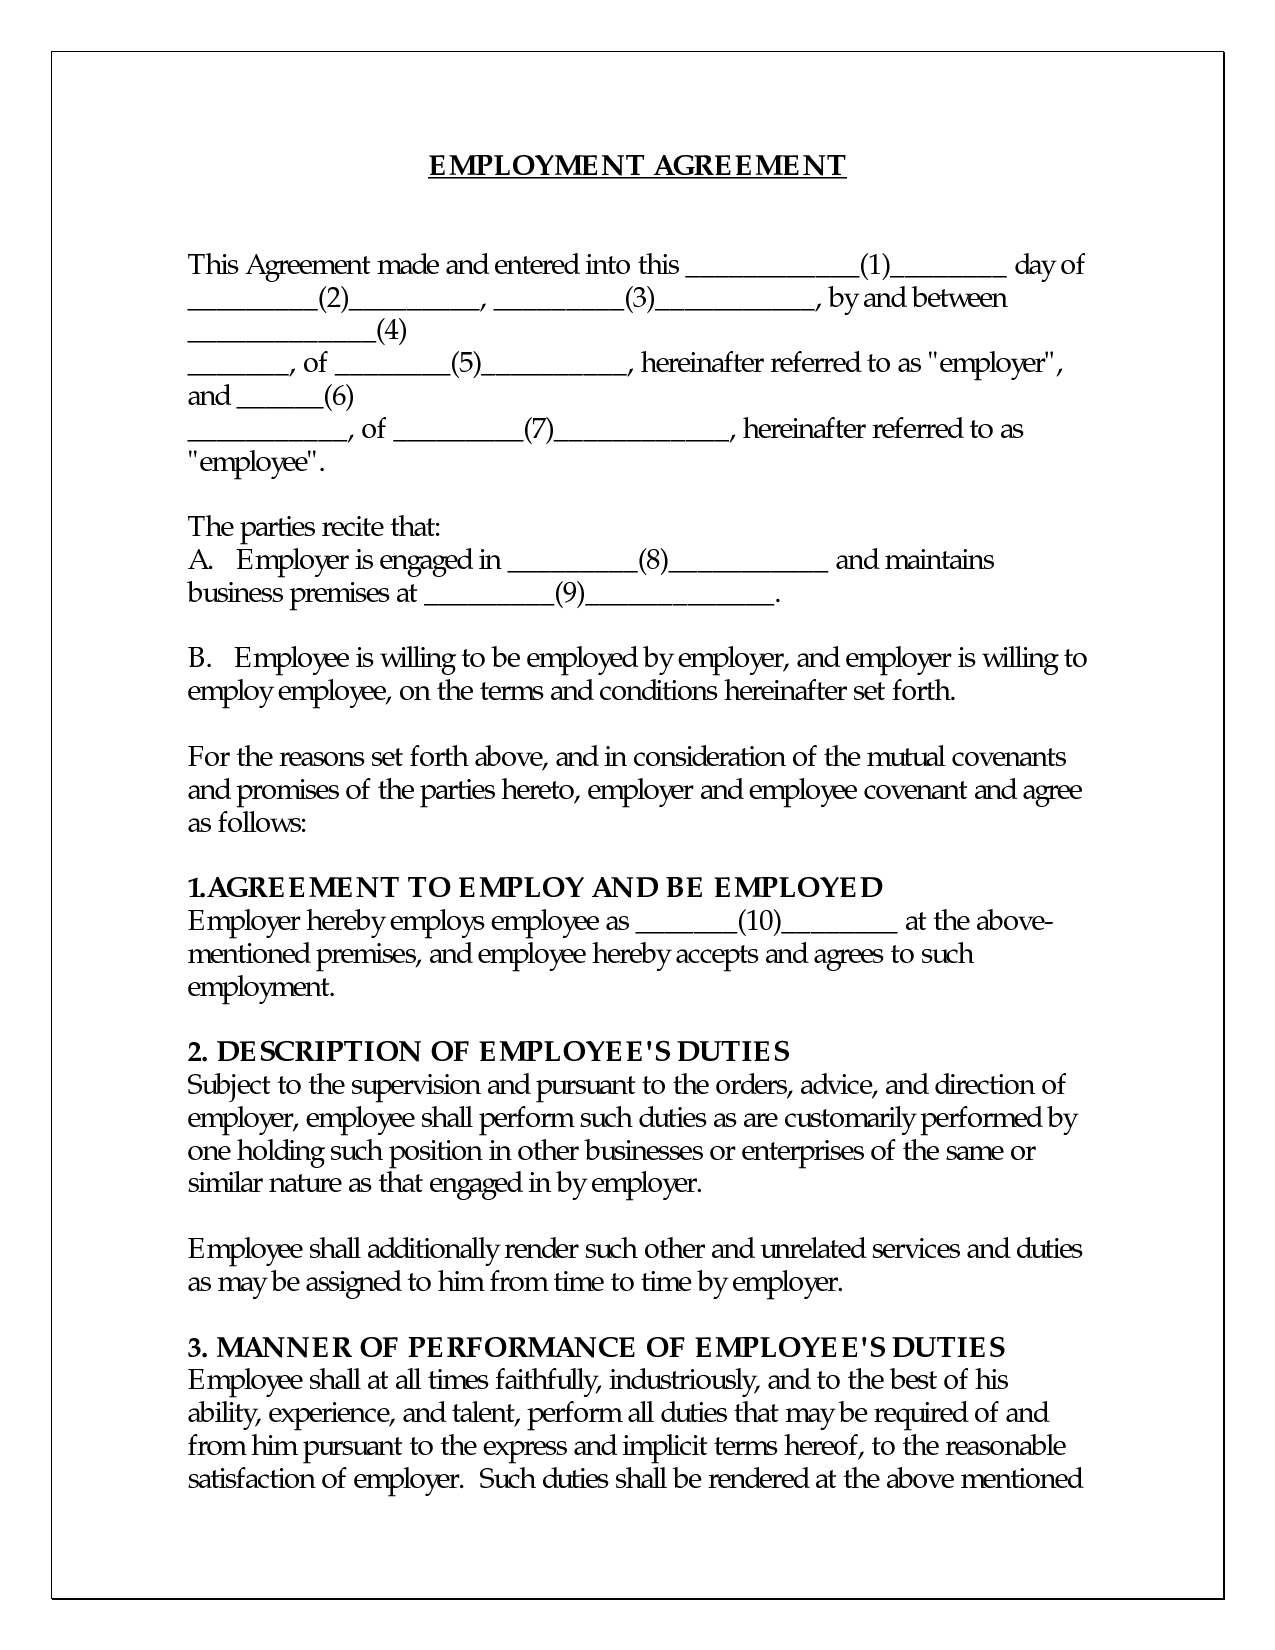 Employment Agreement Sample Free Printable Documents